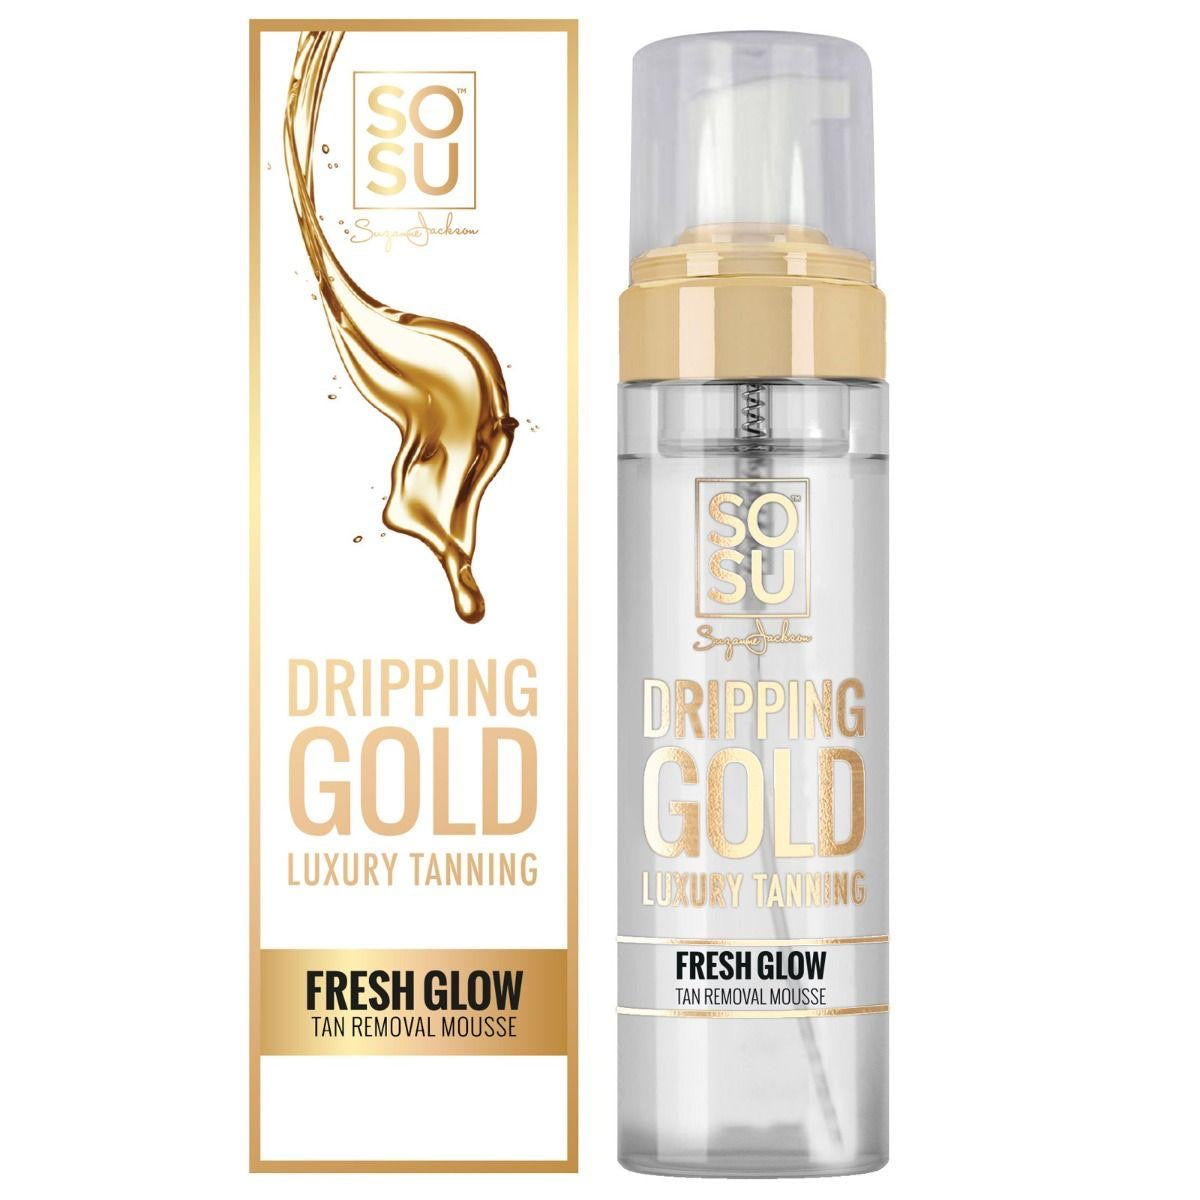 So sue Dripping Gold Tan Removal Mousse